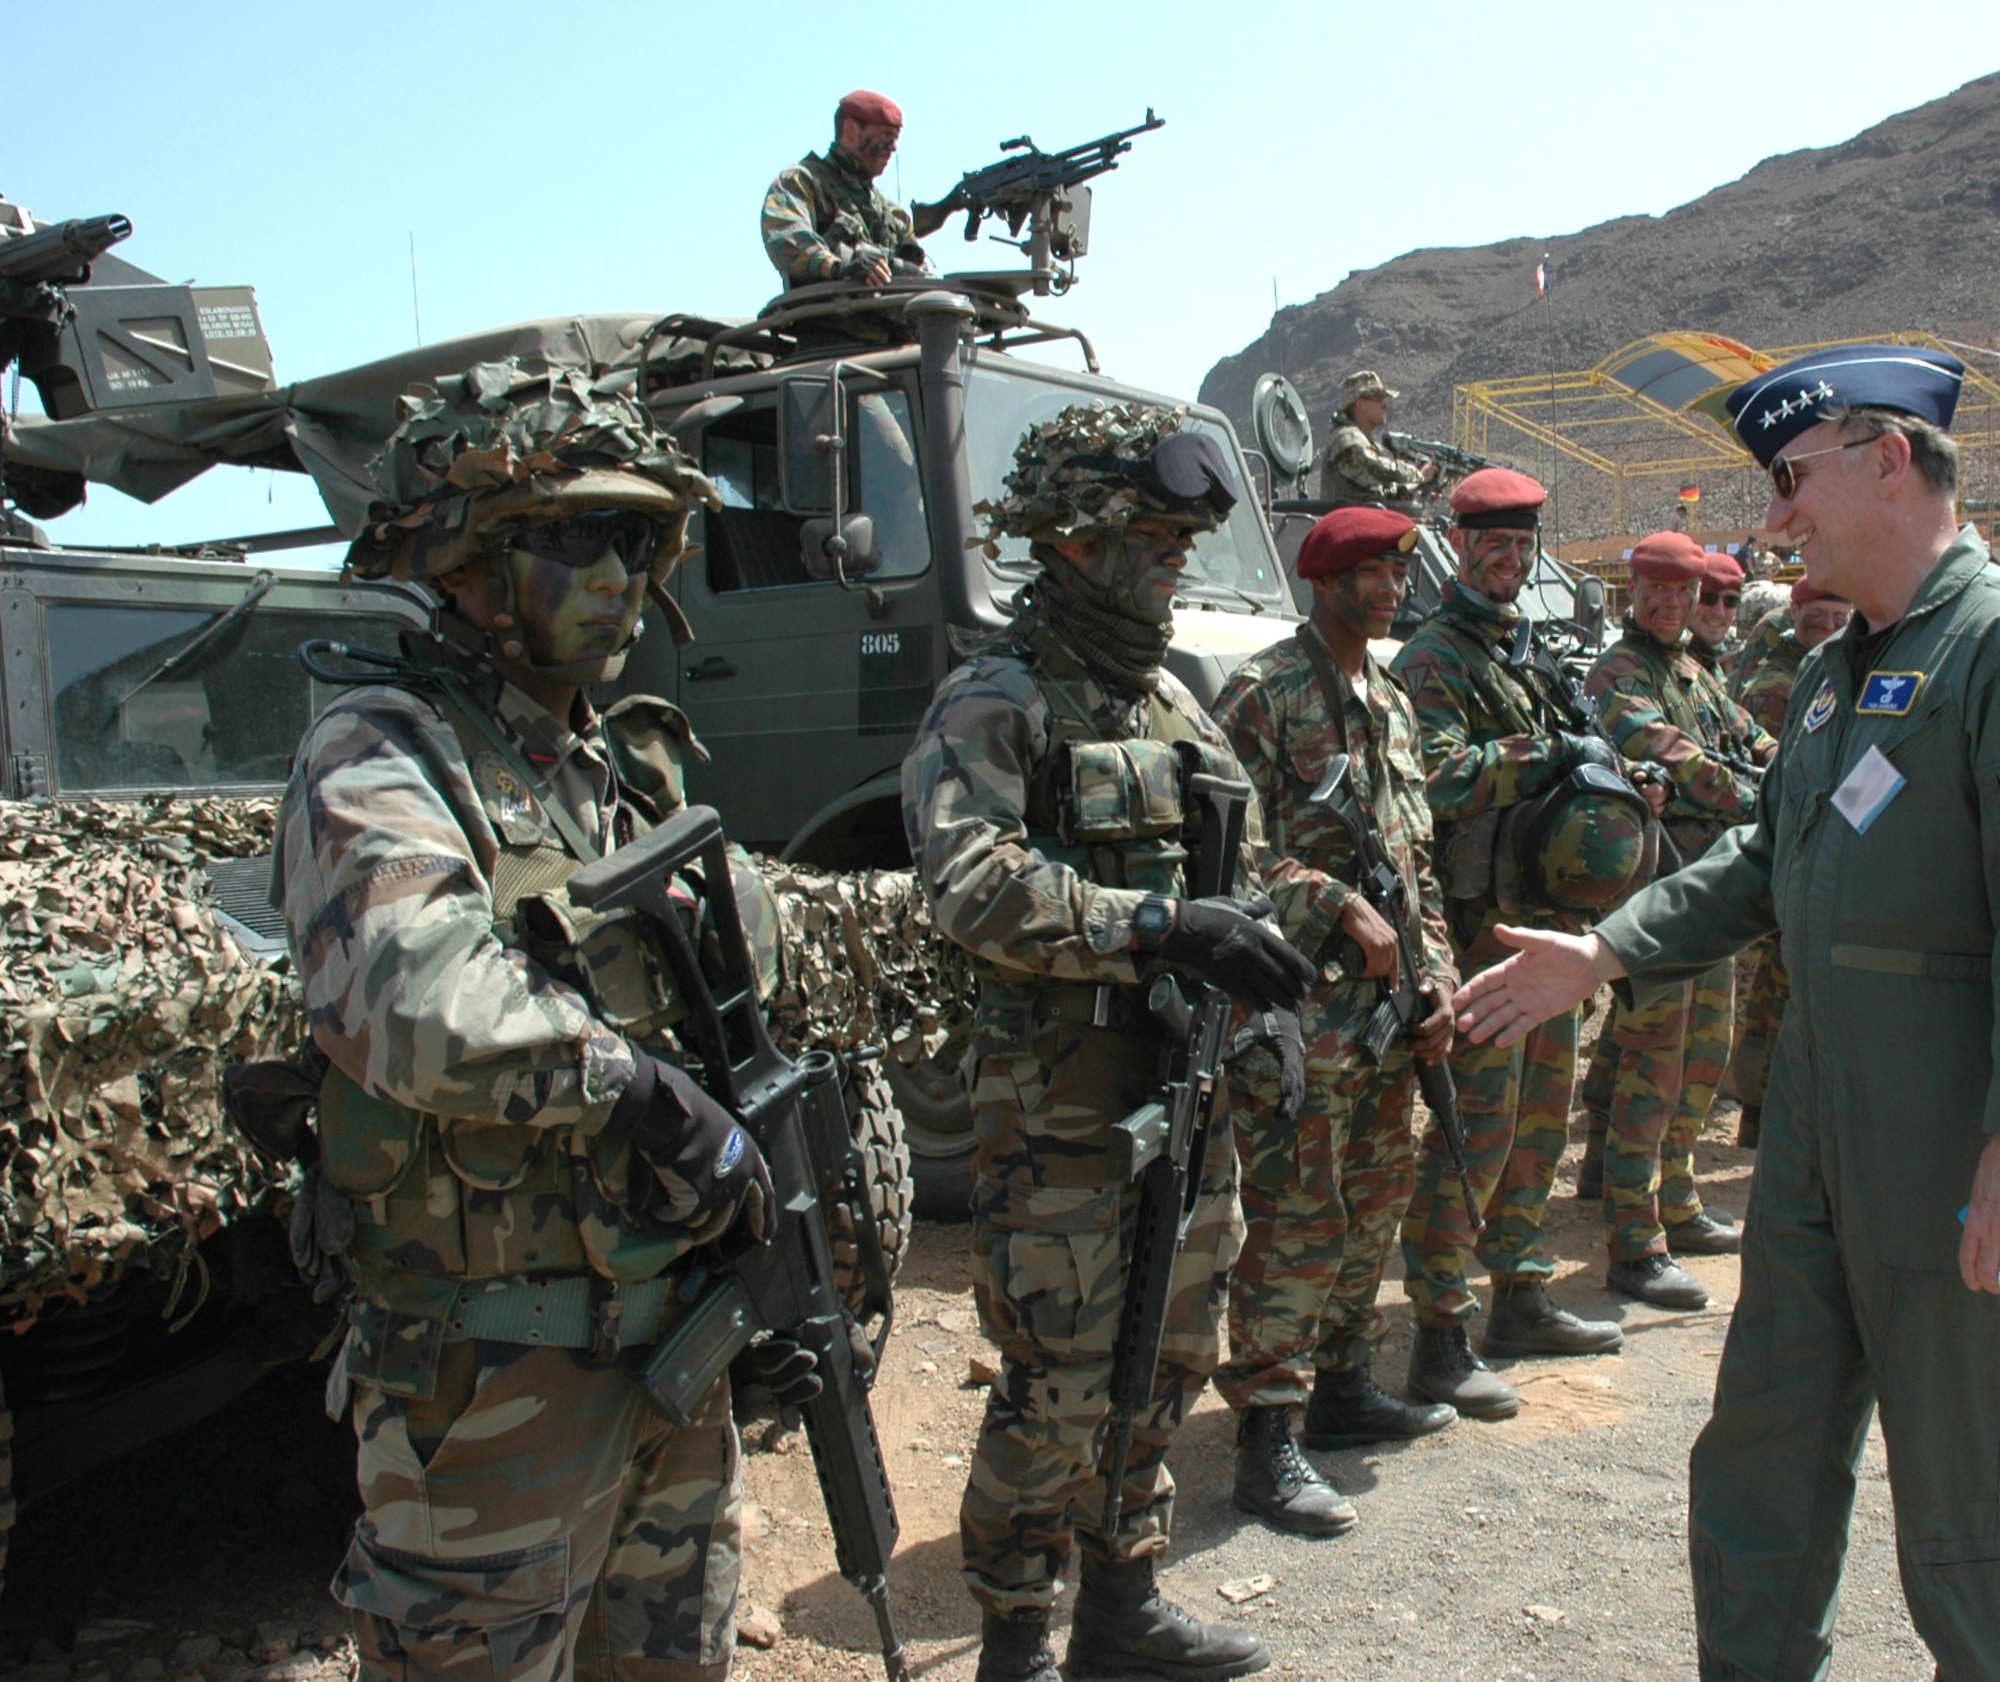 Gen. William T. Hobbins congratulates NATO troops at Exercise Steadfast Jaguar in Sao Vicente, Cape Verde, on Friday, June 23. The purpose of the live exercise is to test NATO Response Force-7's ability to project a force a strategic distance from mainland Europe and sustain it. More than 7,000 NATO personnel from land, maritime and air components trained together as a multinational joint force for the exercise that began June 15 and concludes today. General Hobbins is the commander of U.S. Air Forces Europe, and Air Component Command Ramstein, as well as director of the Joint Air Power Competency Center at Ramstein Air Base, Germany. (U.S. Air Force photo/Capt. Krista Carlos)